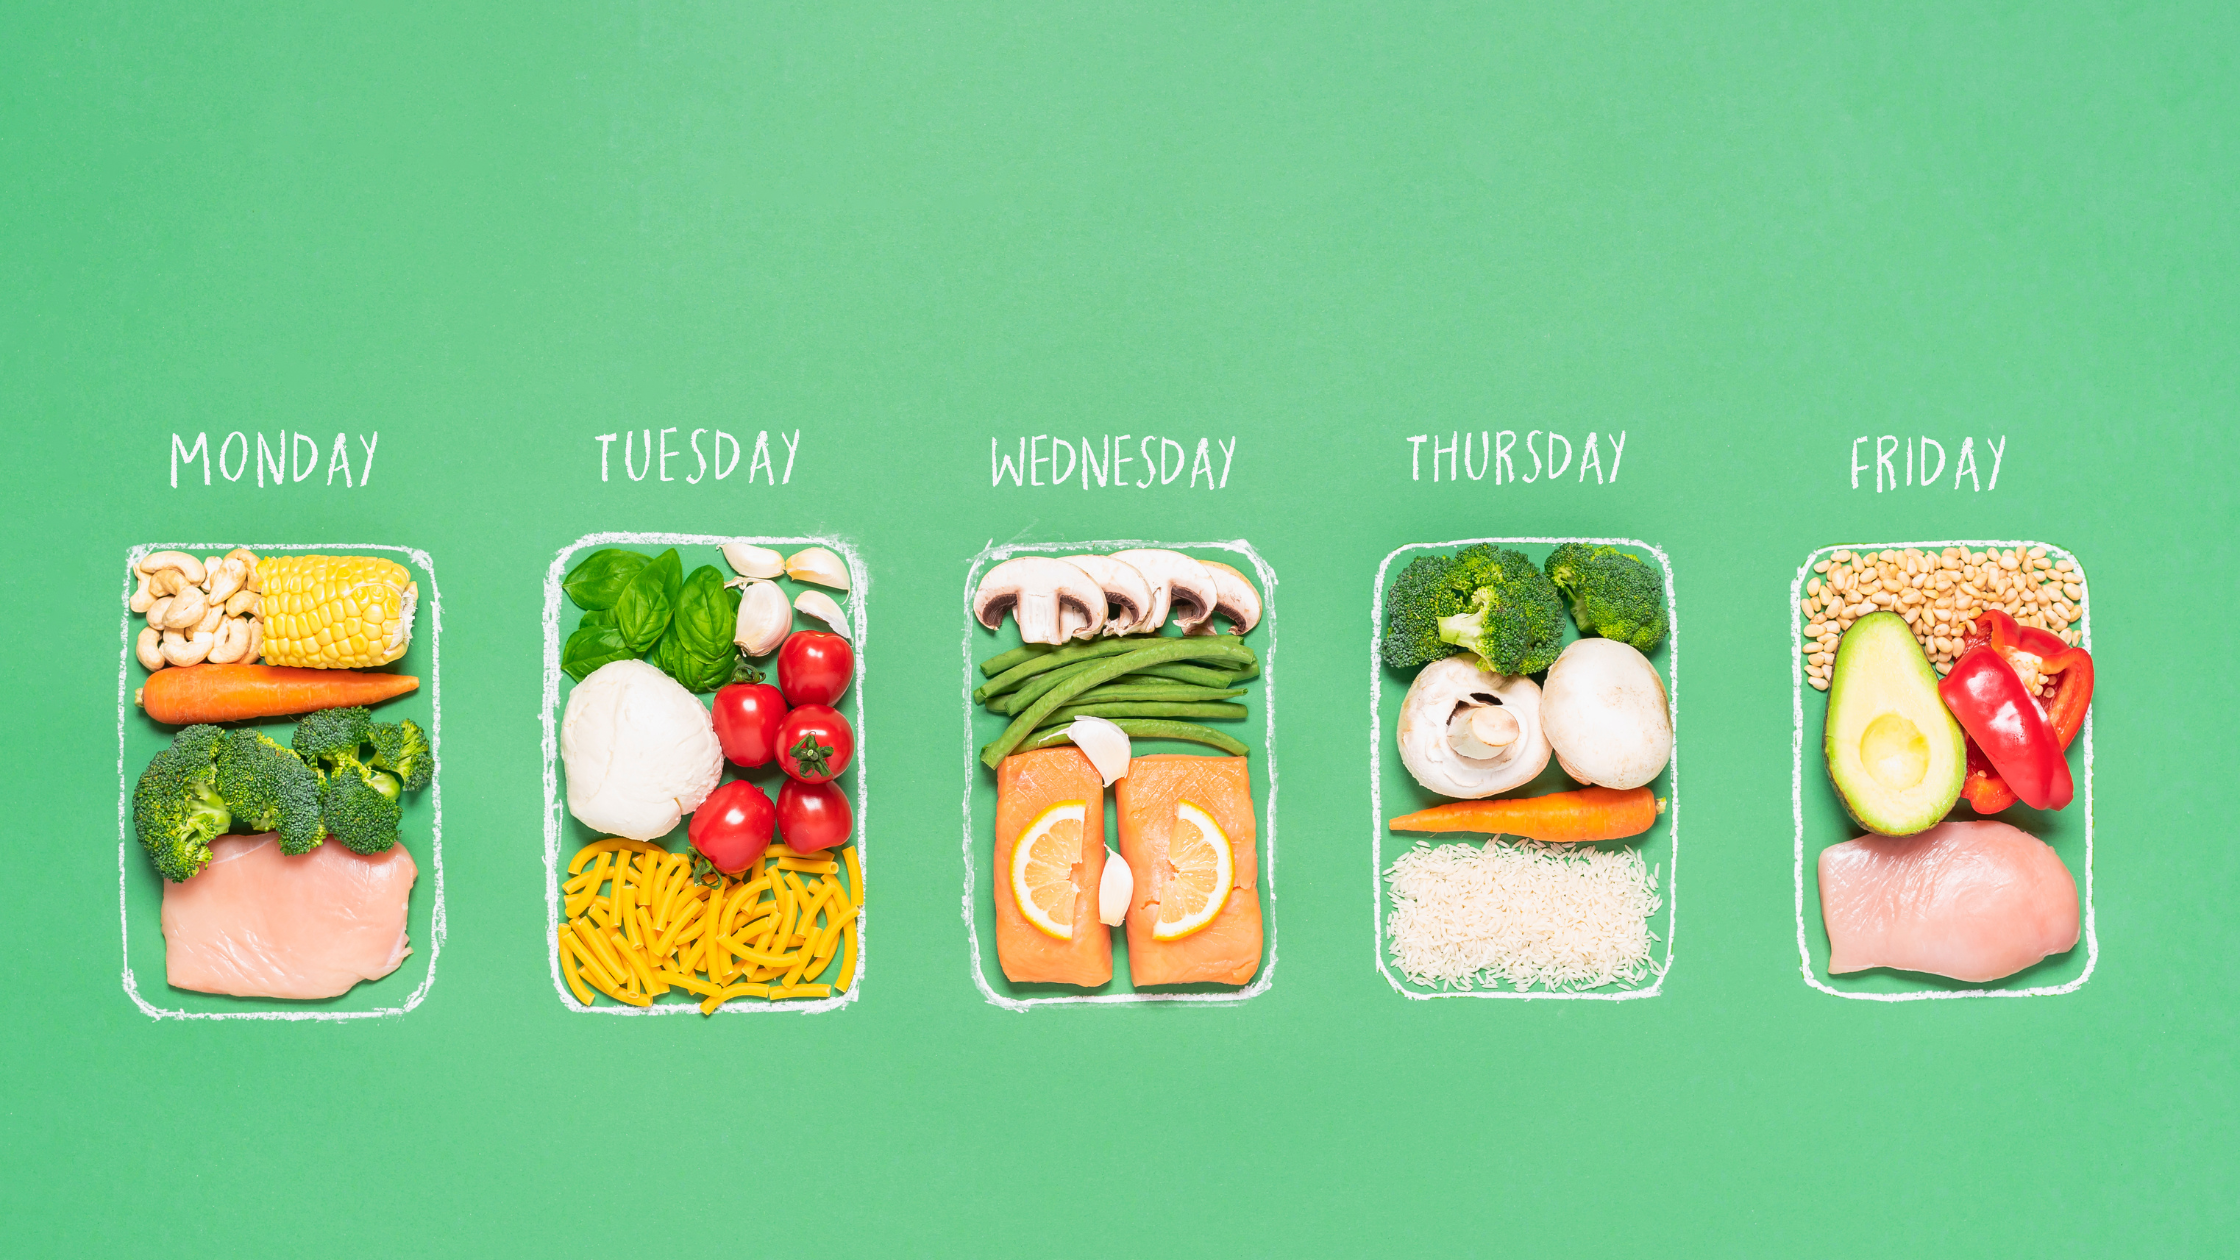 Can You Save Money with a Weekly Meal Prep Service?